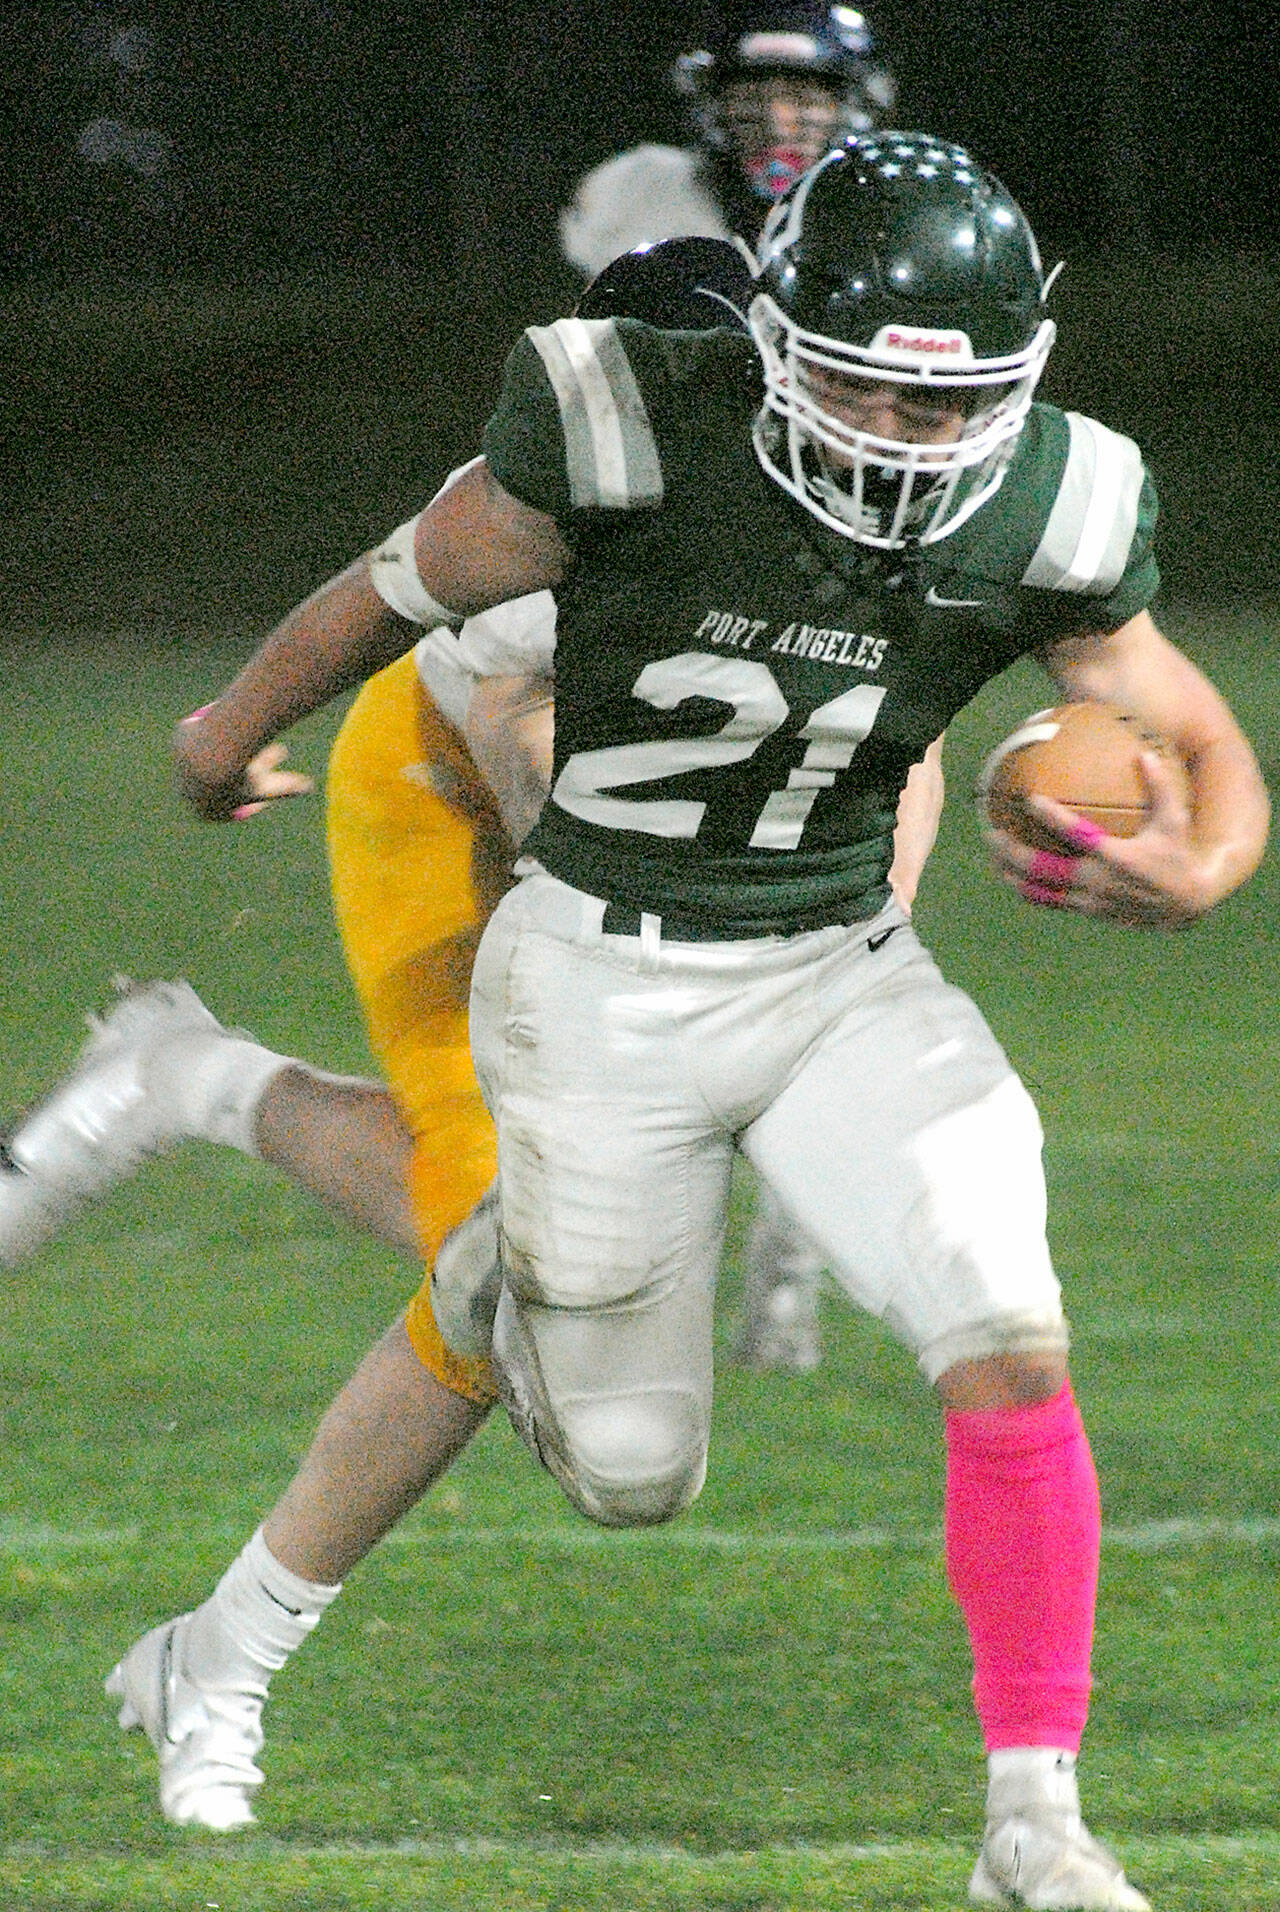 Port Angeles’ Daniel Cable escapes the Bainbridge defense in the Riders’ 27-7 win at Civic Field in October. (Keith Thorpe/Peninsula Daily News)